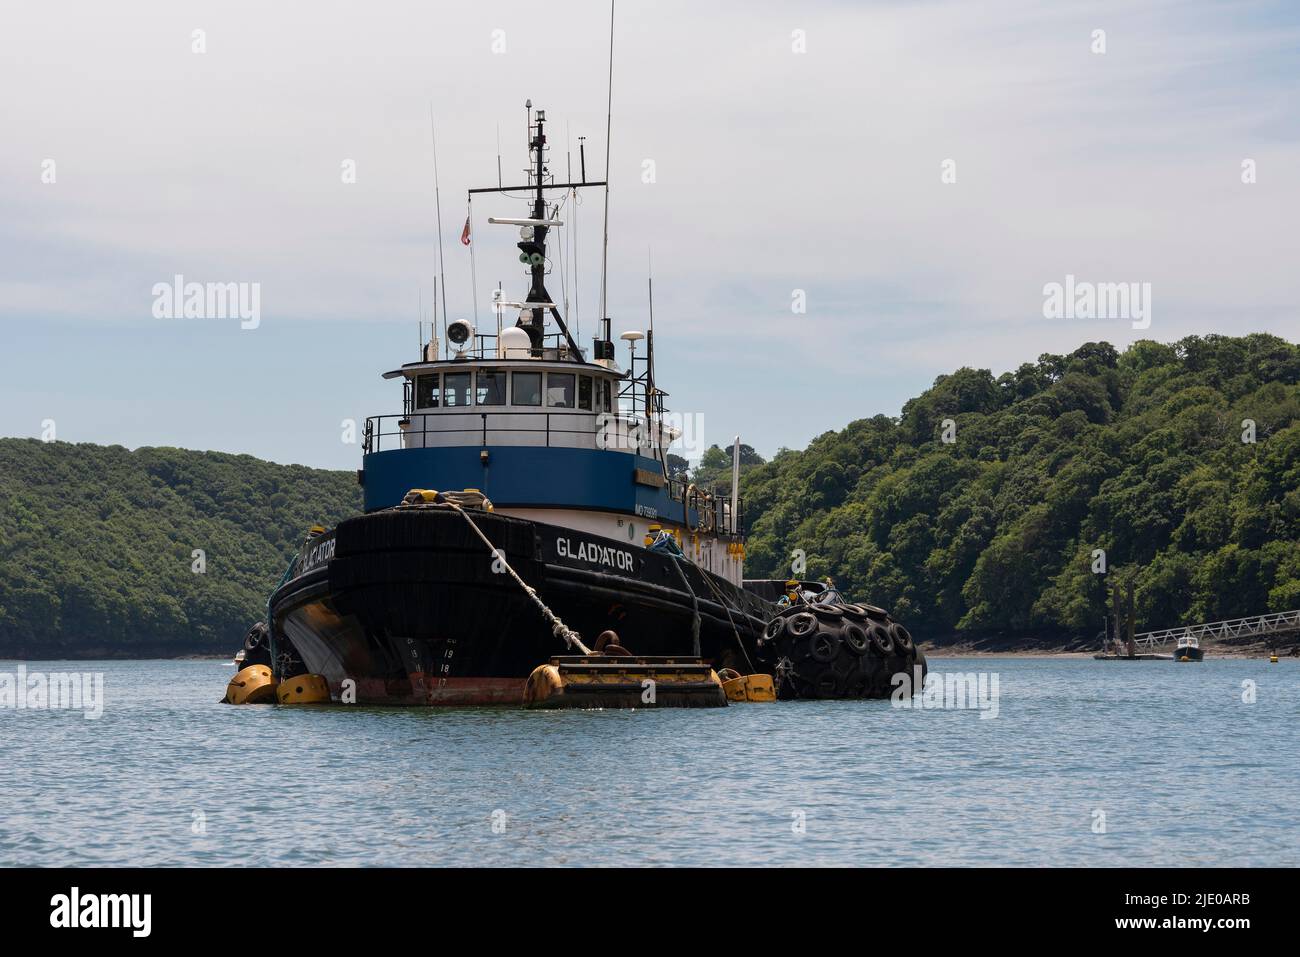 Cornwall, England, UK. 2022. The Gladiator built 1975 538 tons, a tug boat laid up on the River Fal in Cornwall, UK Stock Photo